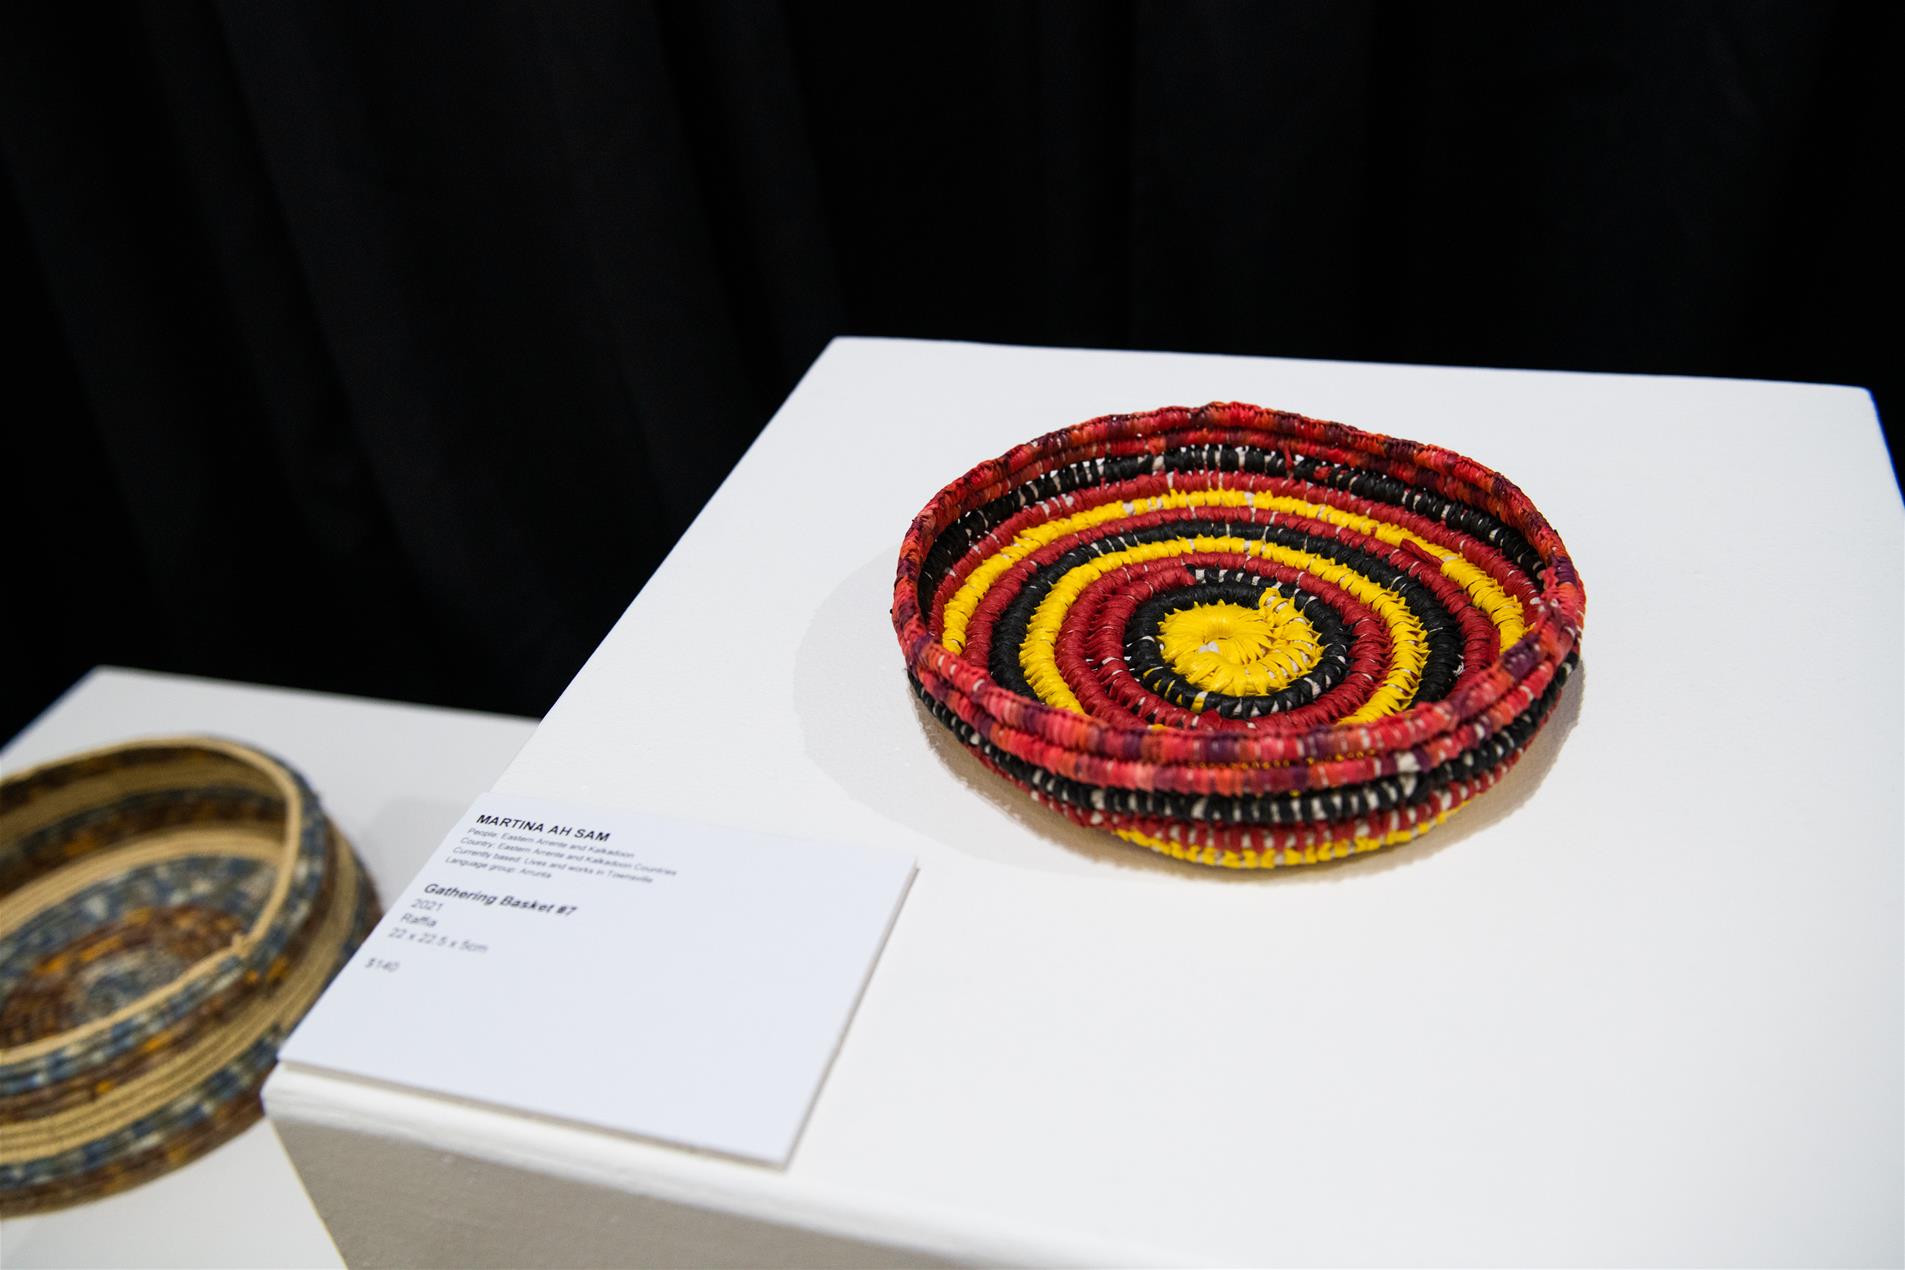 A red, black and yellow gathering basket displayed at an exhibition.